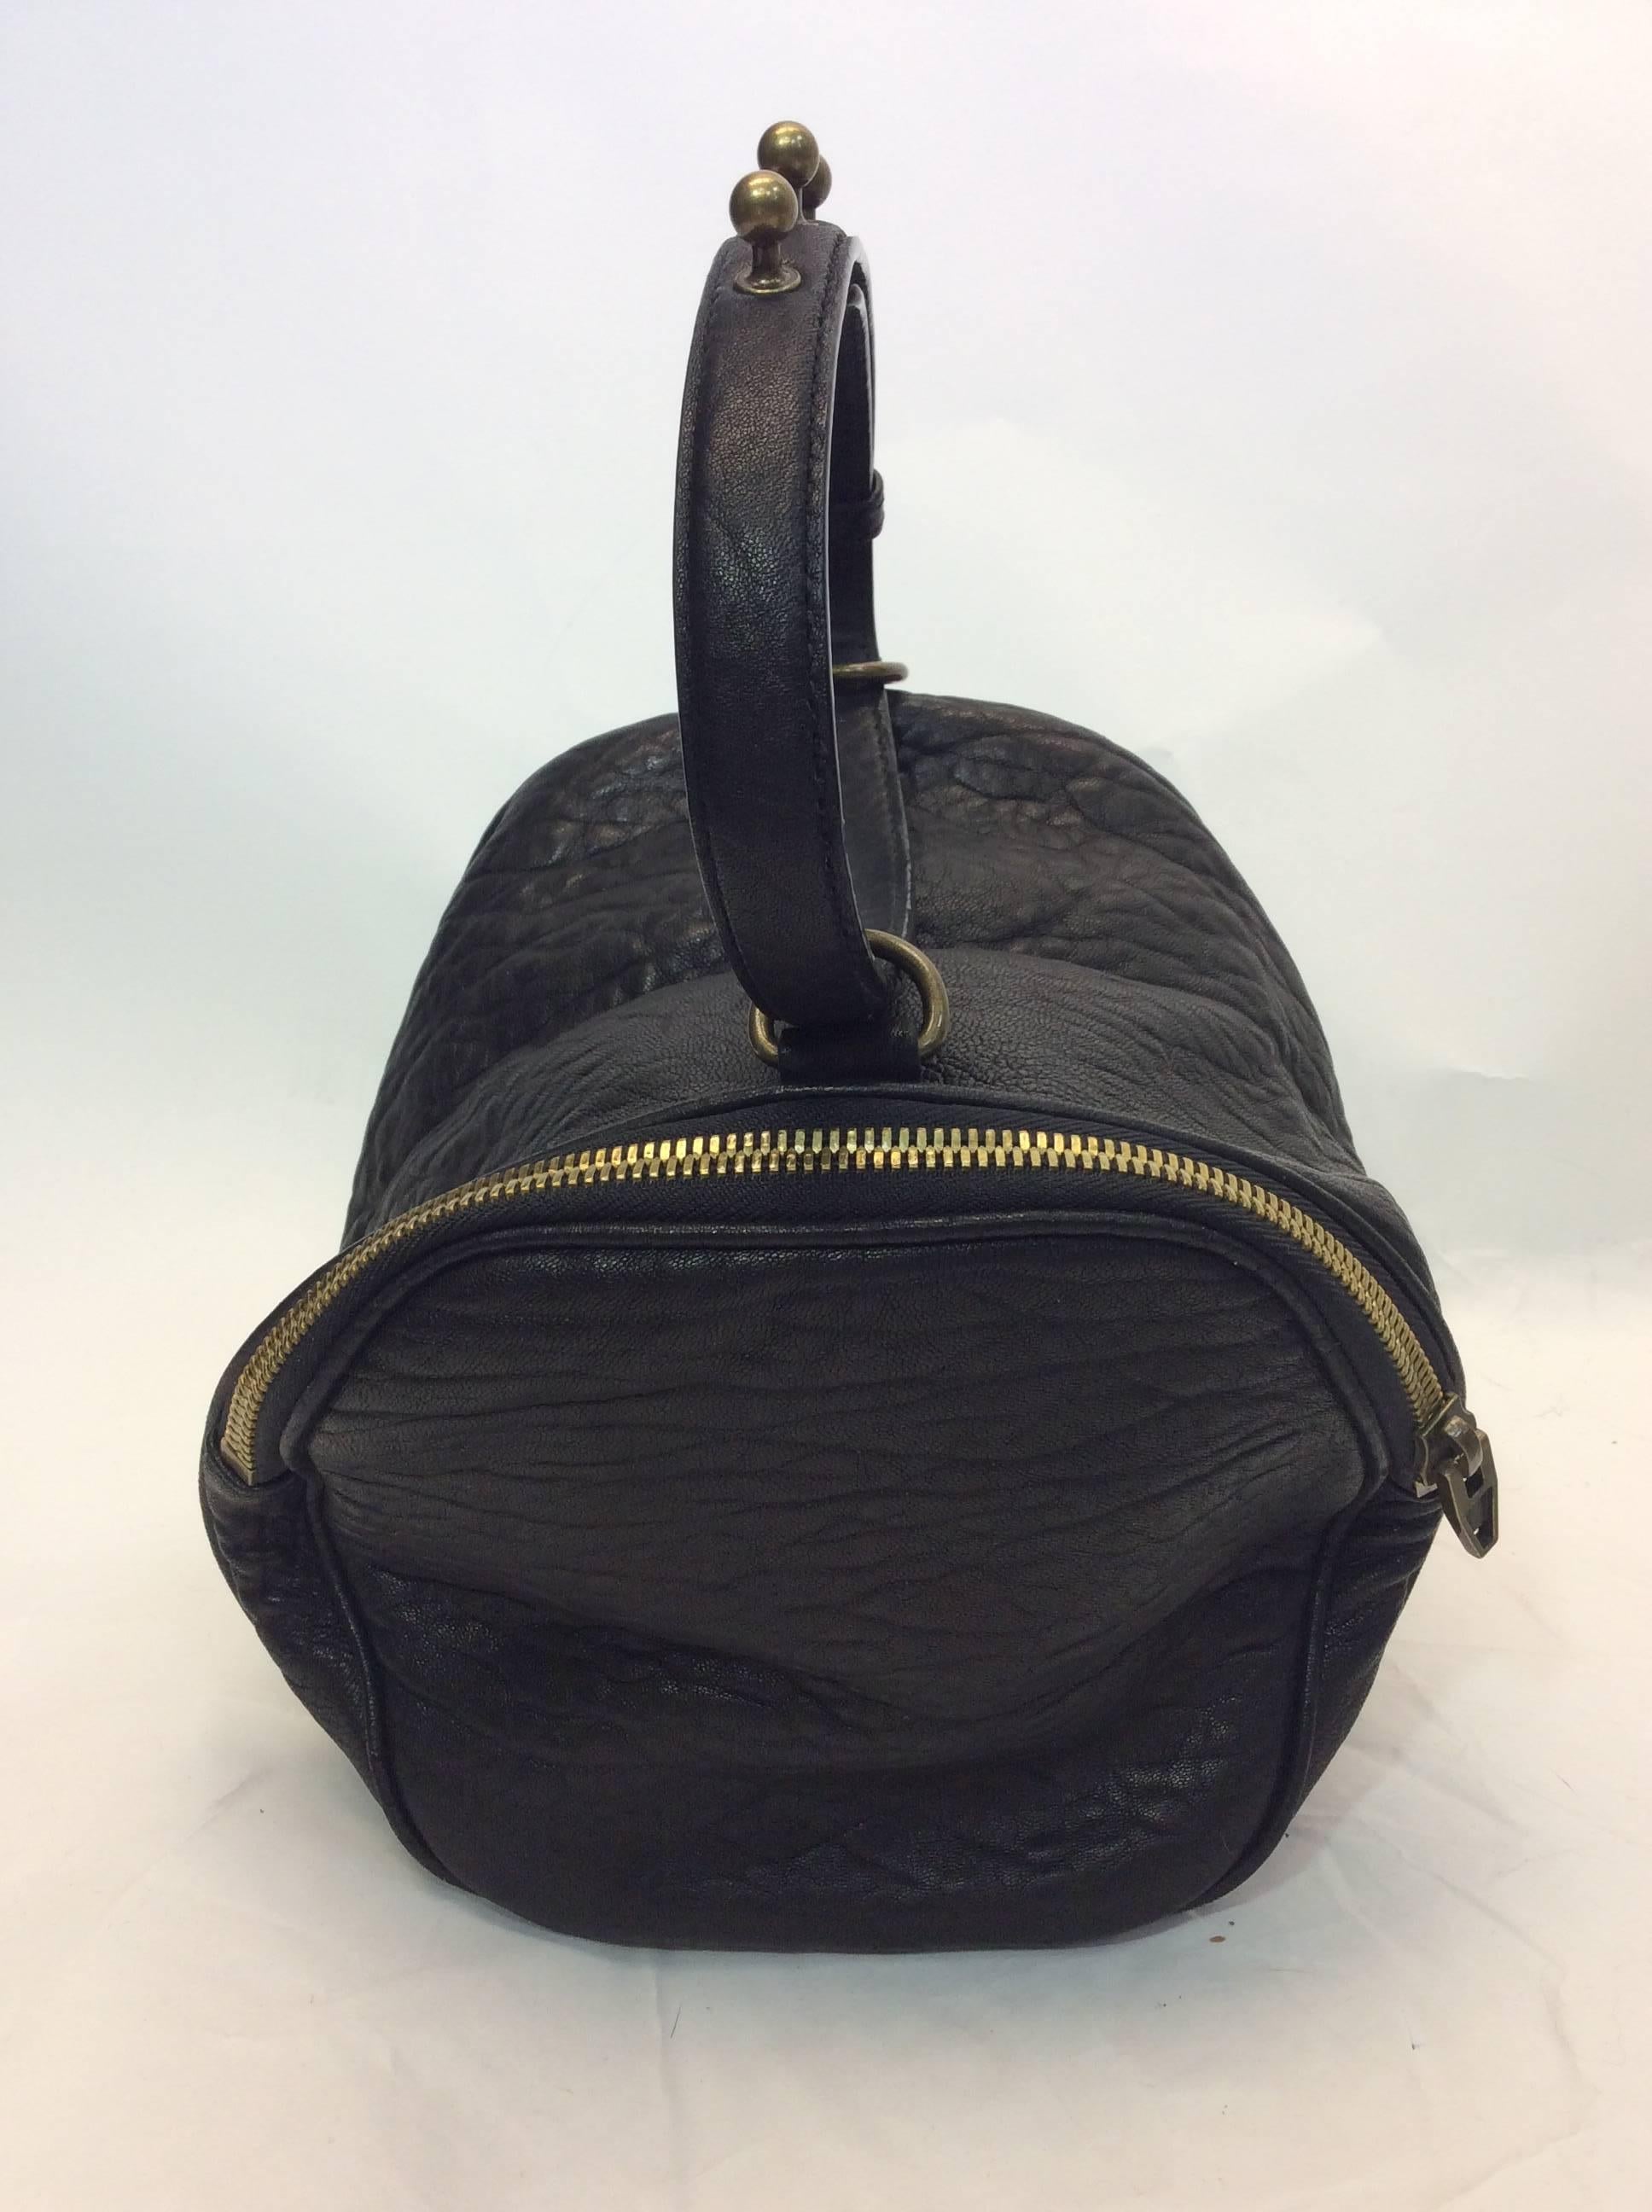 Alexander Wang Small Studded Dumbo Leather Bag In Excellent Condition For Sale In Narberth, PA